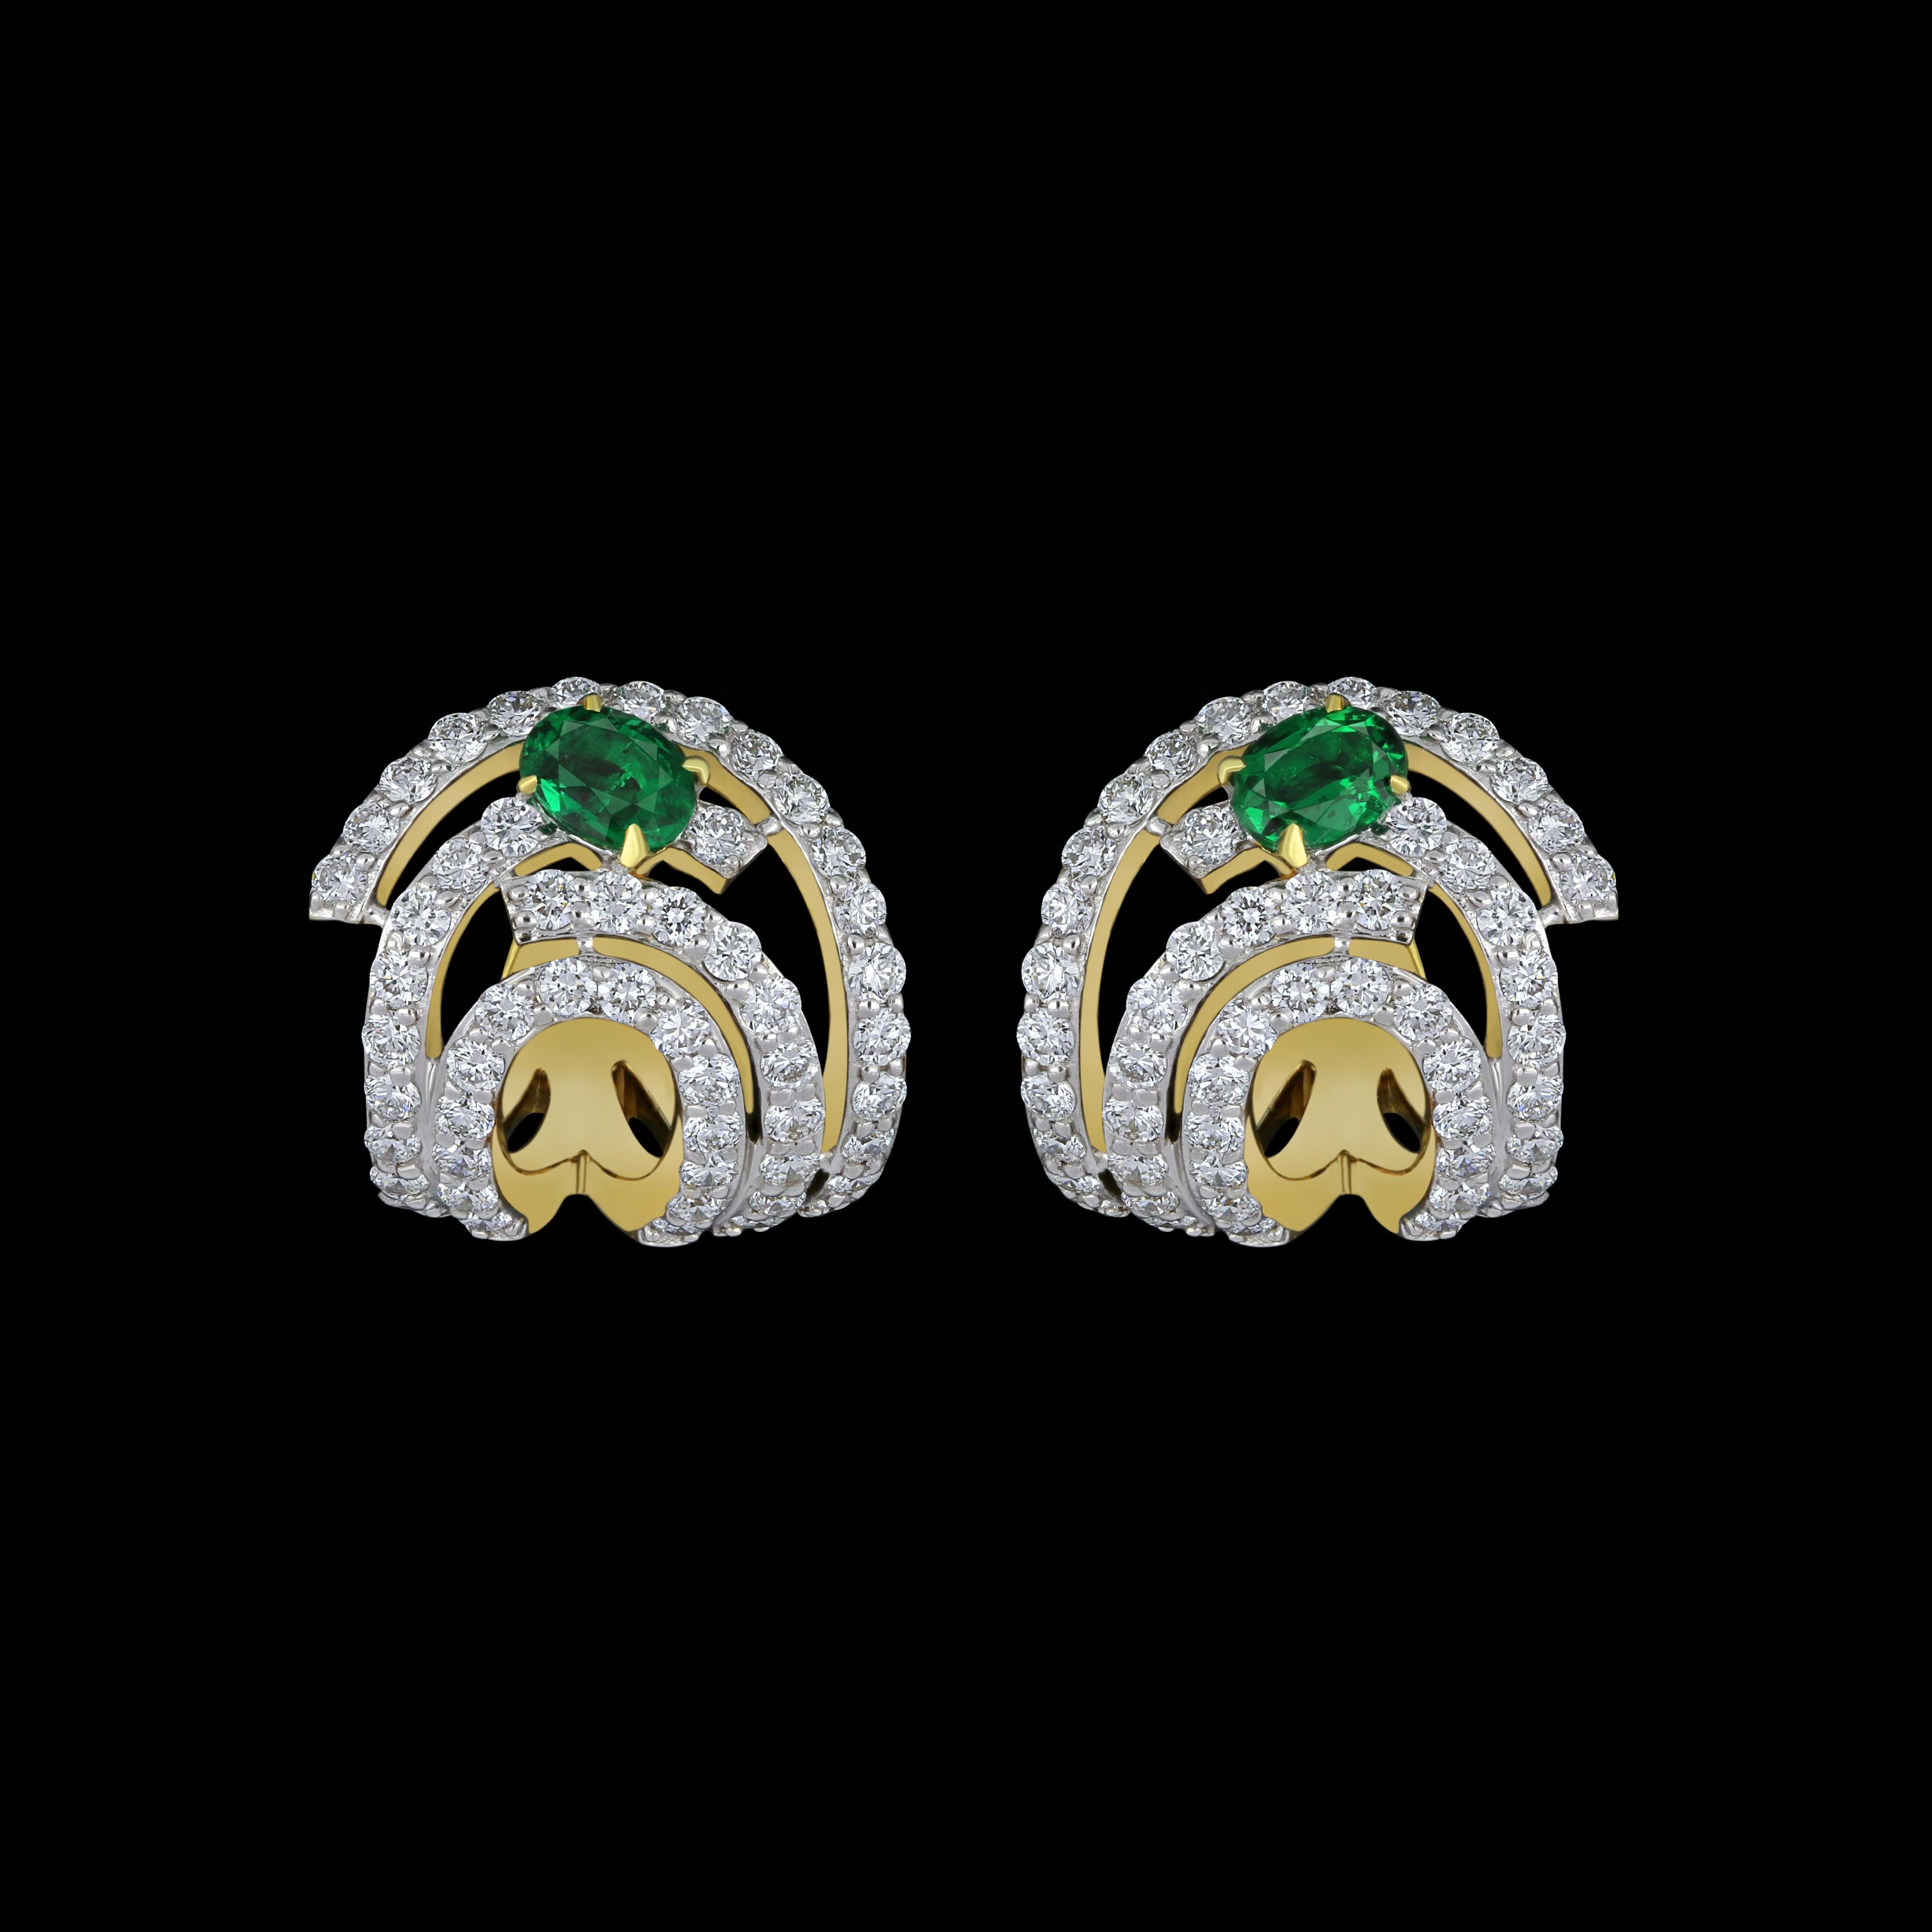 Elegant and exquisitely detailed 18 Karat White Gold Earring, center set with 0.30Cts .Oval Shape Emerald and micro pave set Diamonds, weighing approx. 0.95Cts Beautifully Hand crafted in 18 Karat White Gold.

Stone Detail:
Emerald: 4x3MM

Stone